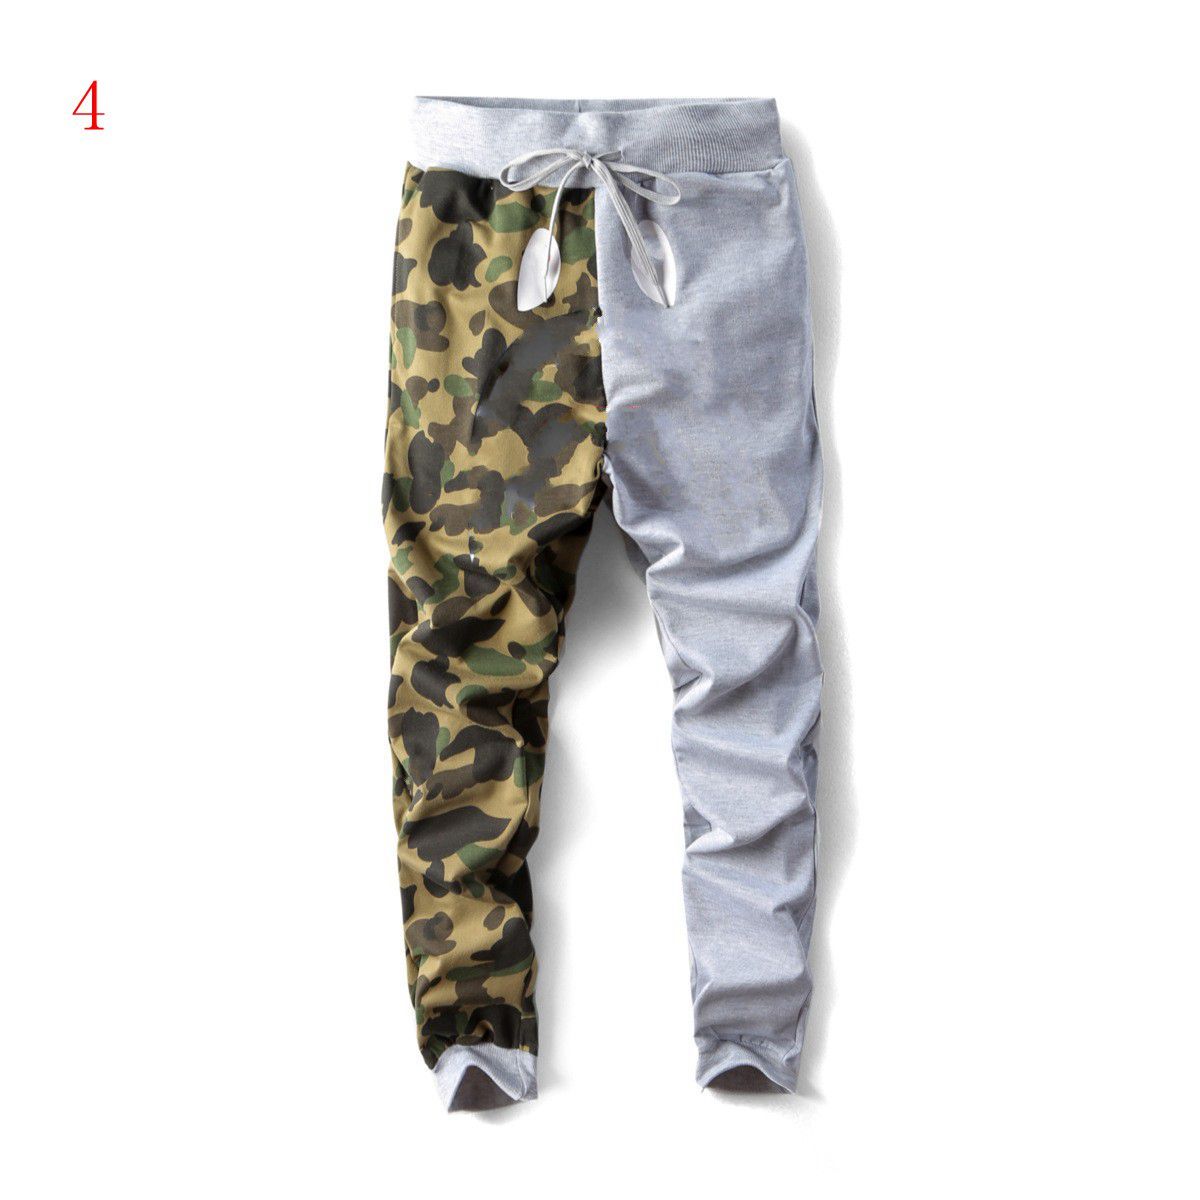 #4 gray+camouflage